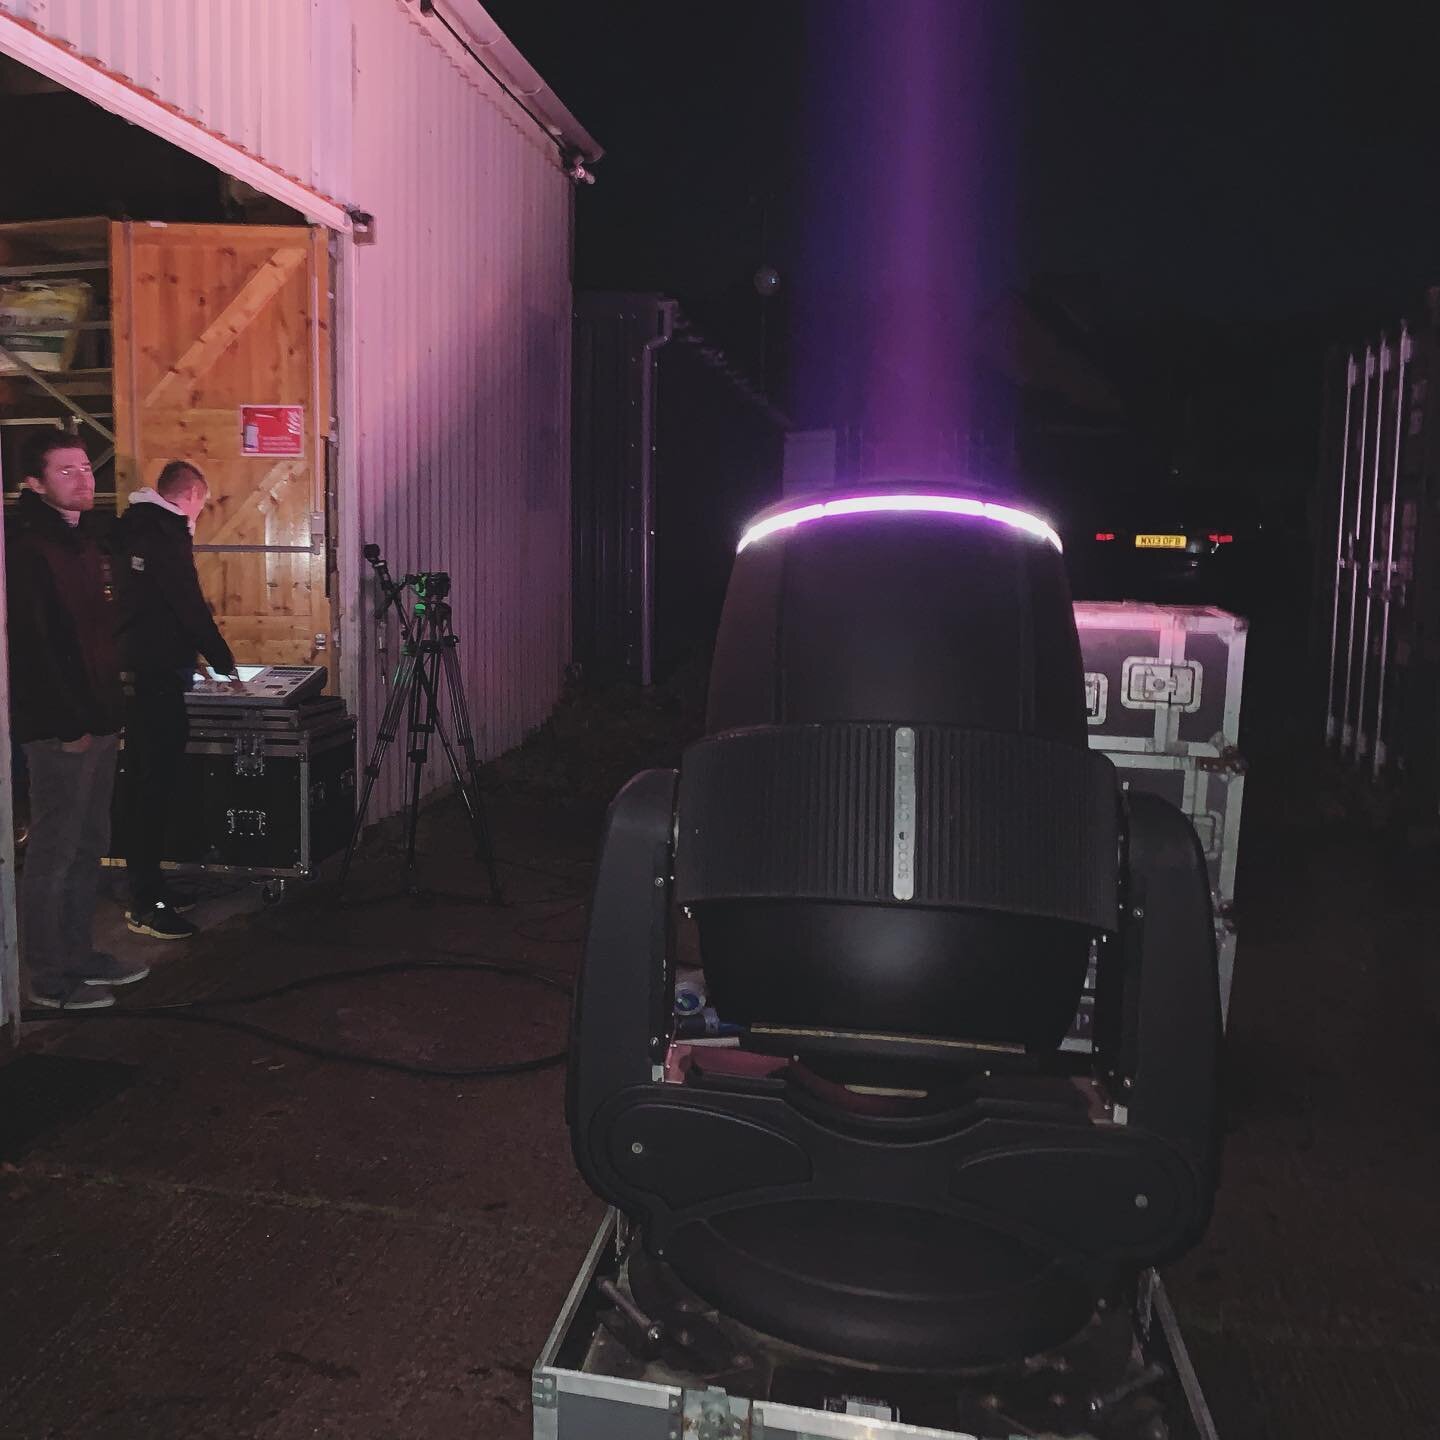 Trying out our Space Cannon searchlights #exeter #devon #searchlights #2020 #stageengage